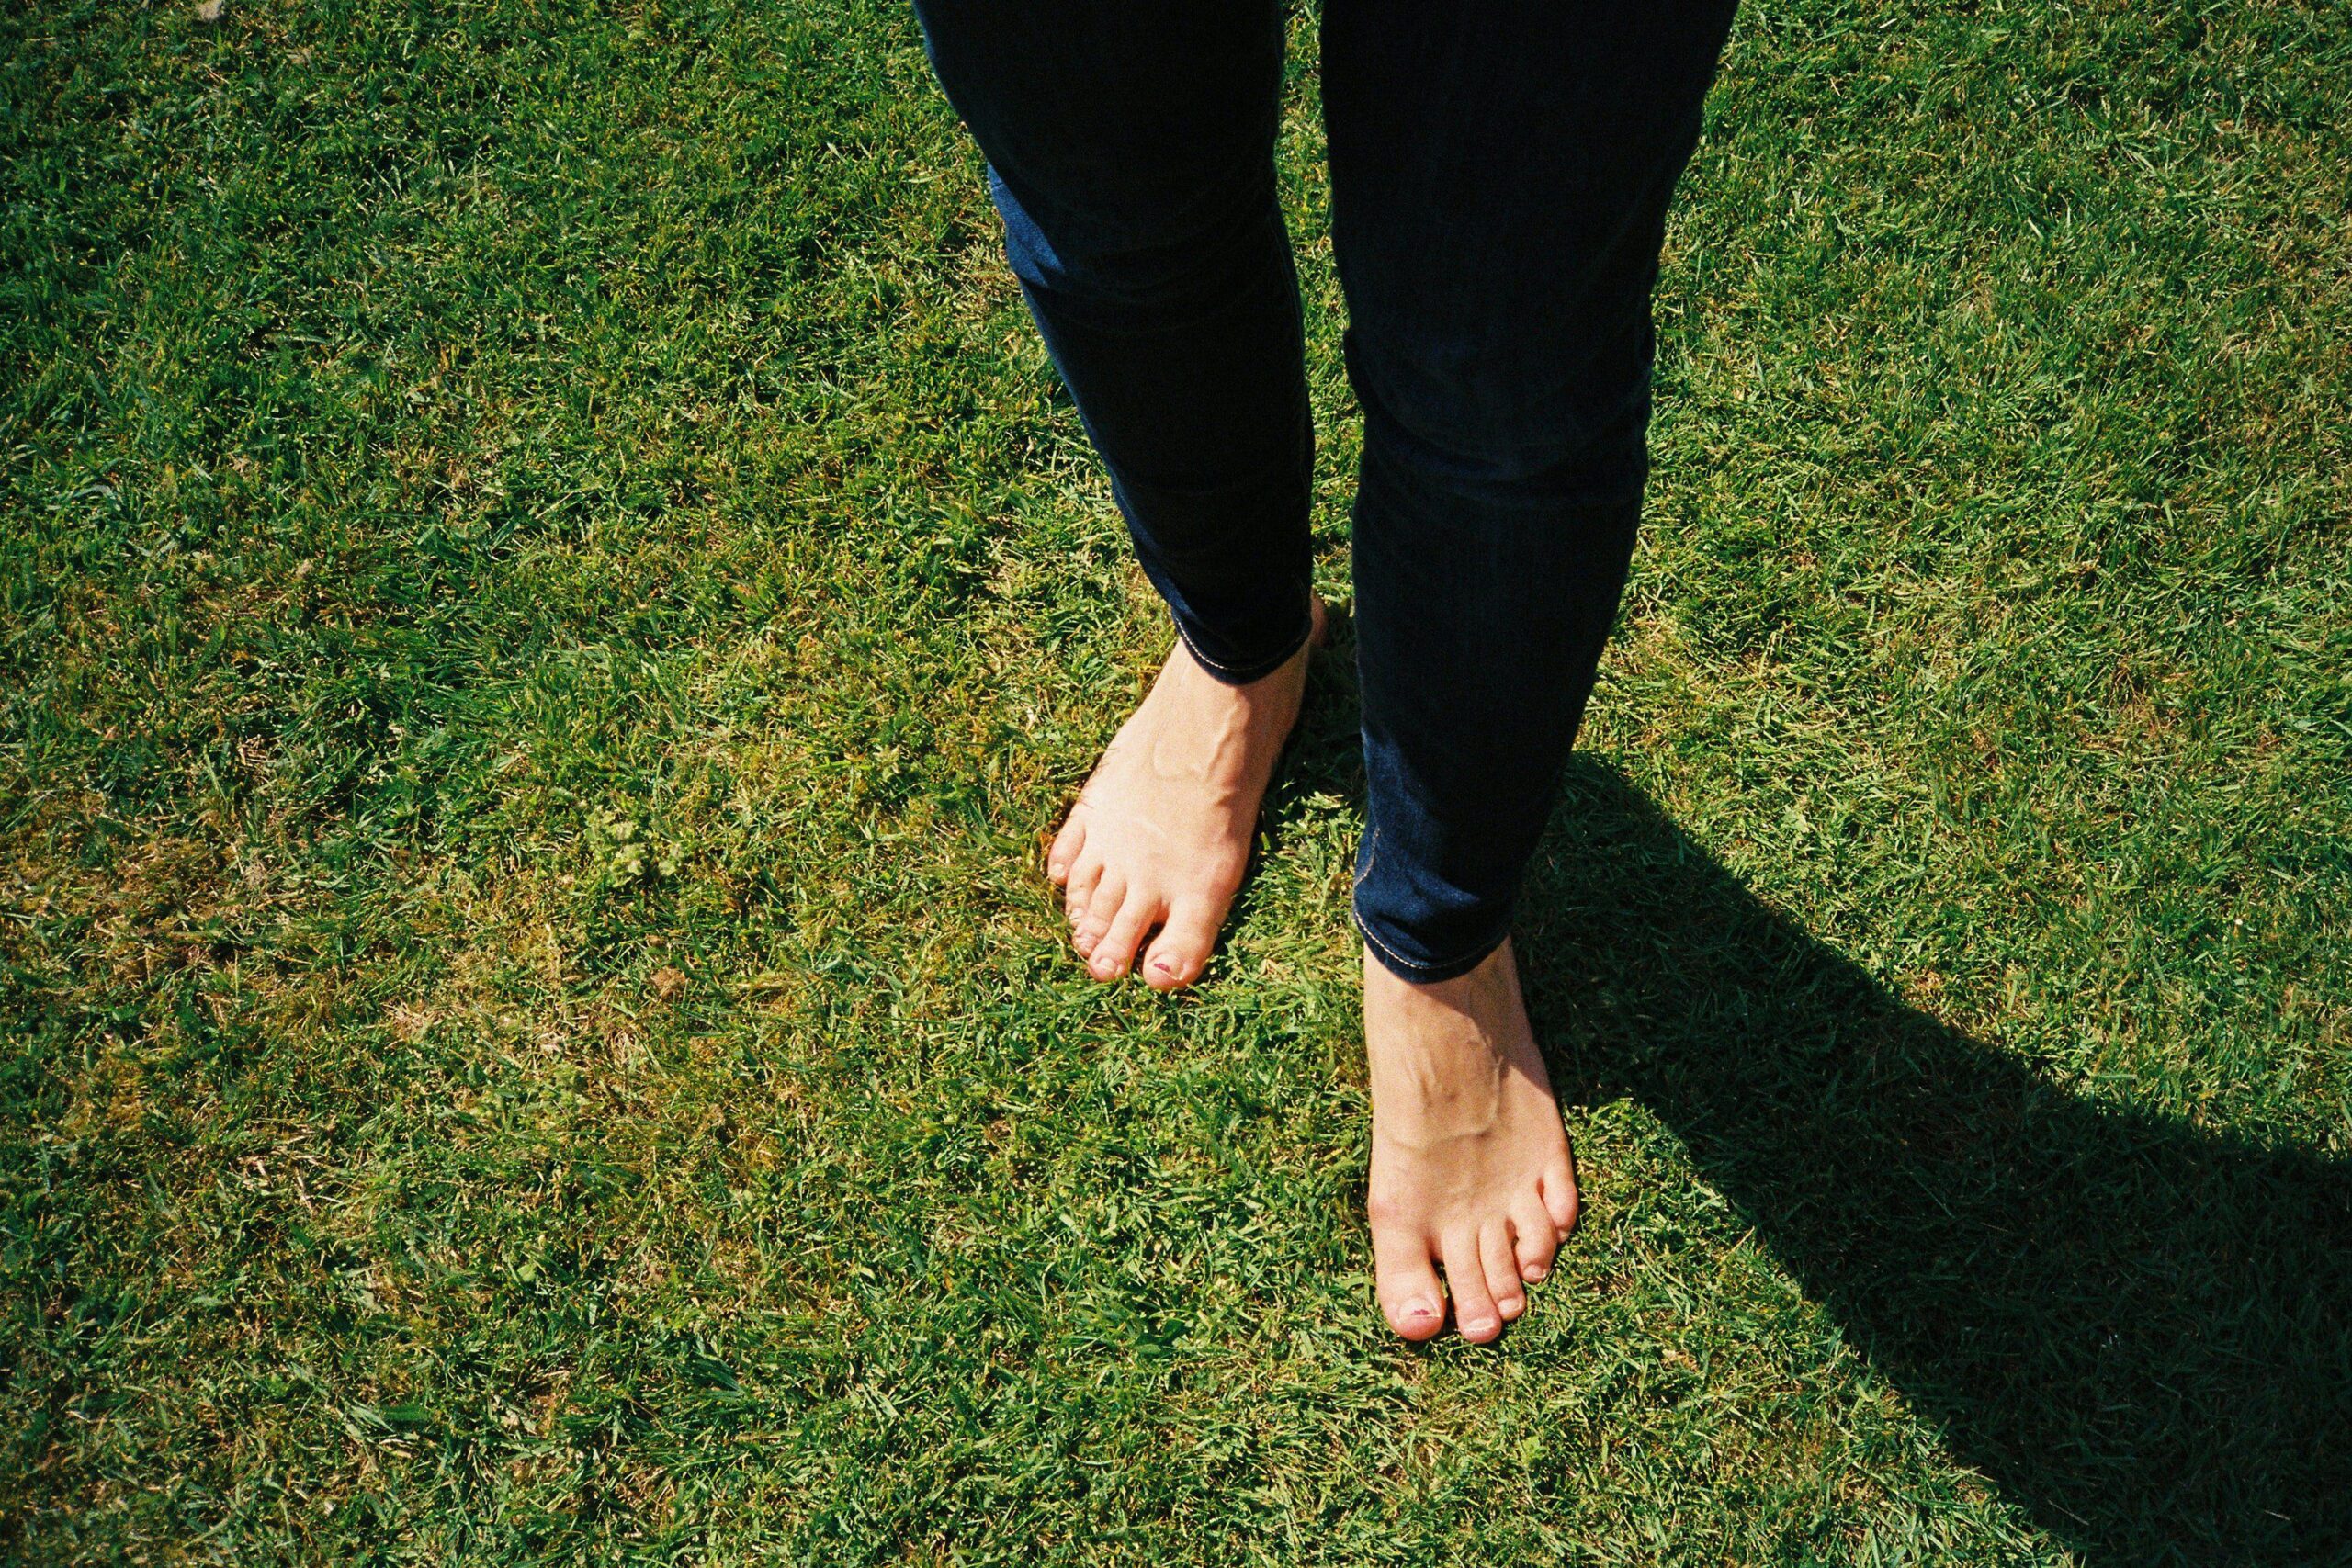 Earthing: What Is It?